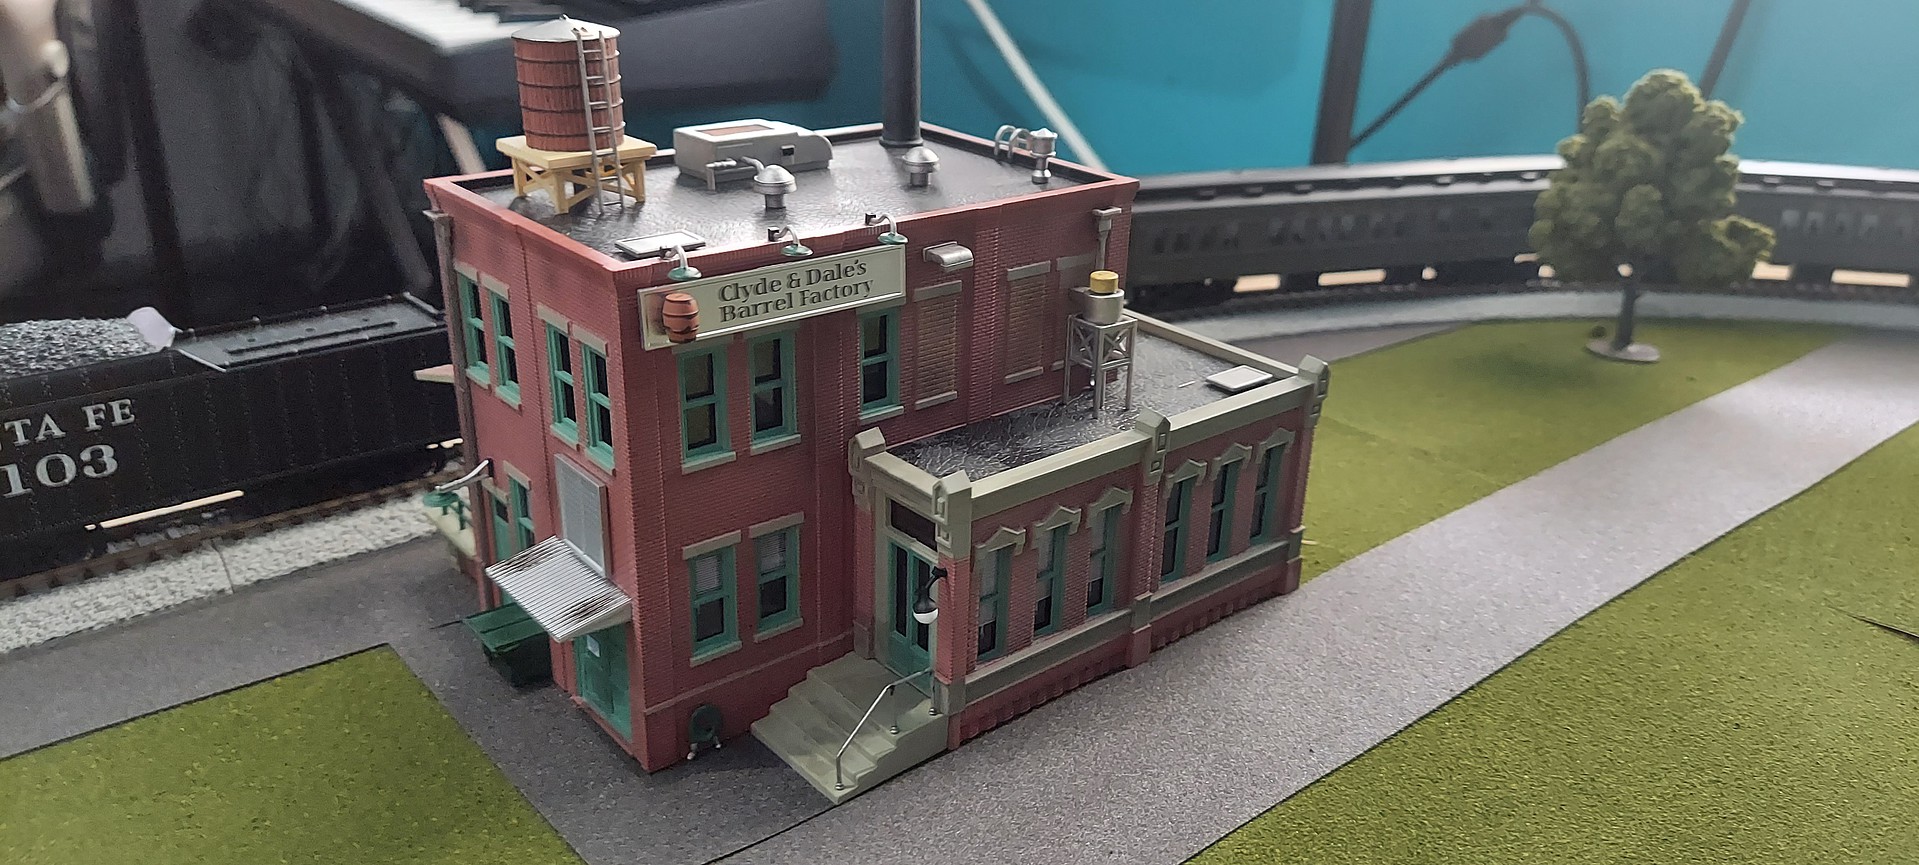 Details about   WOODLAND SCENICS BUILT & READY CLYDE & DALE'S BARREL FACTORY N SCALE BUILDING 